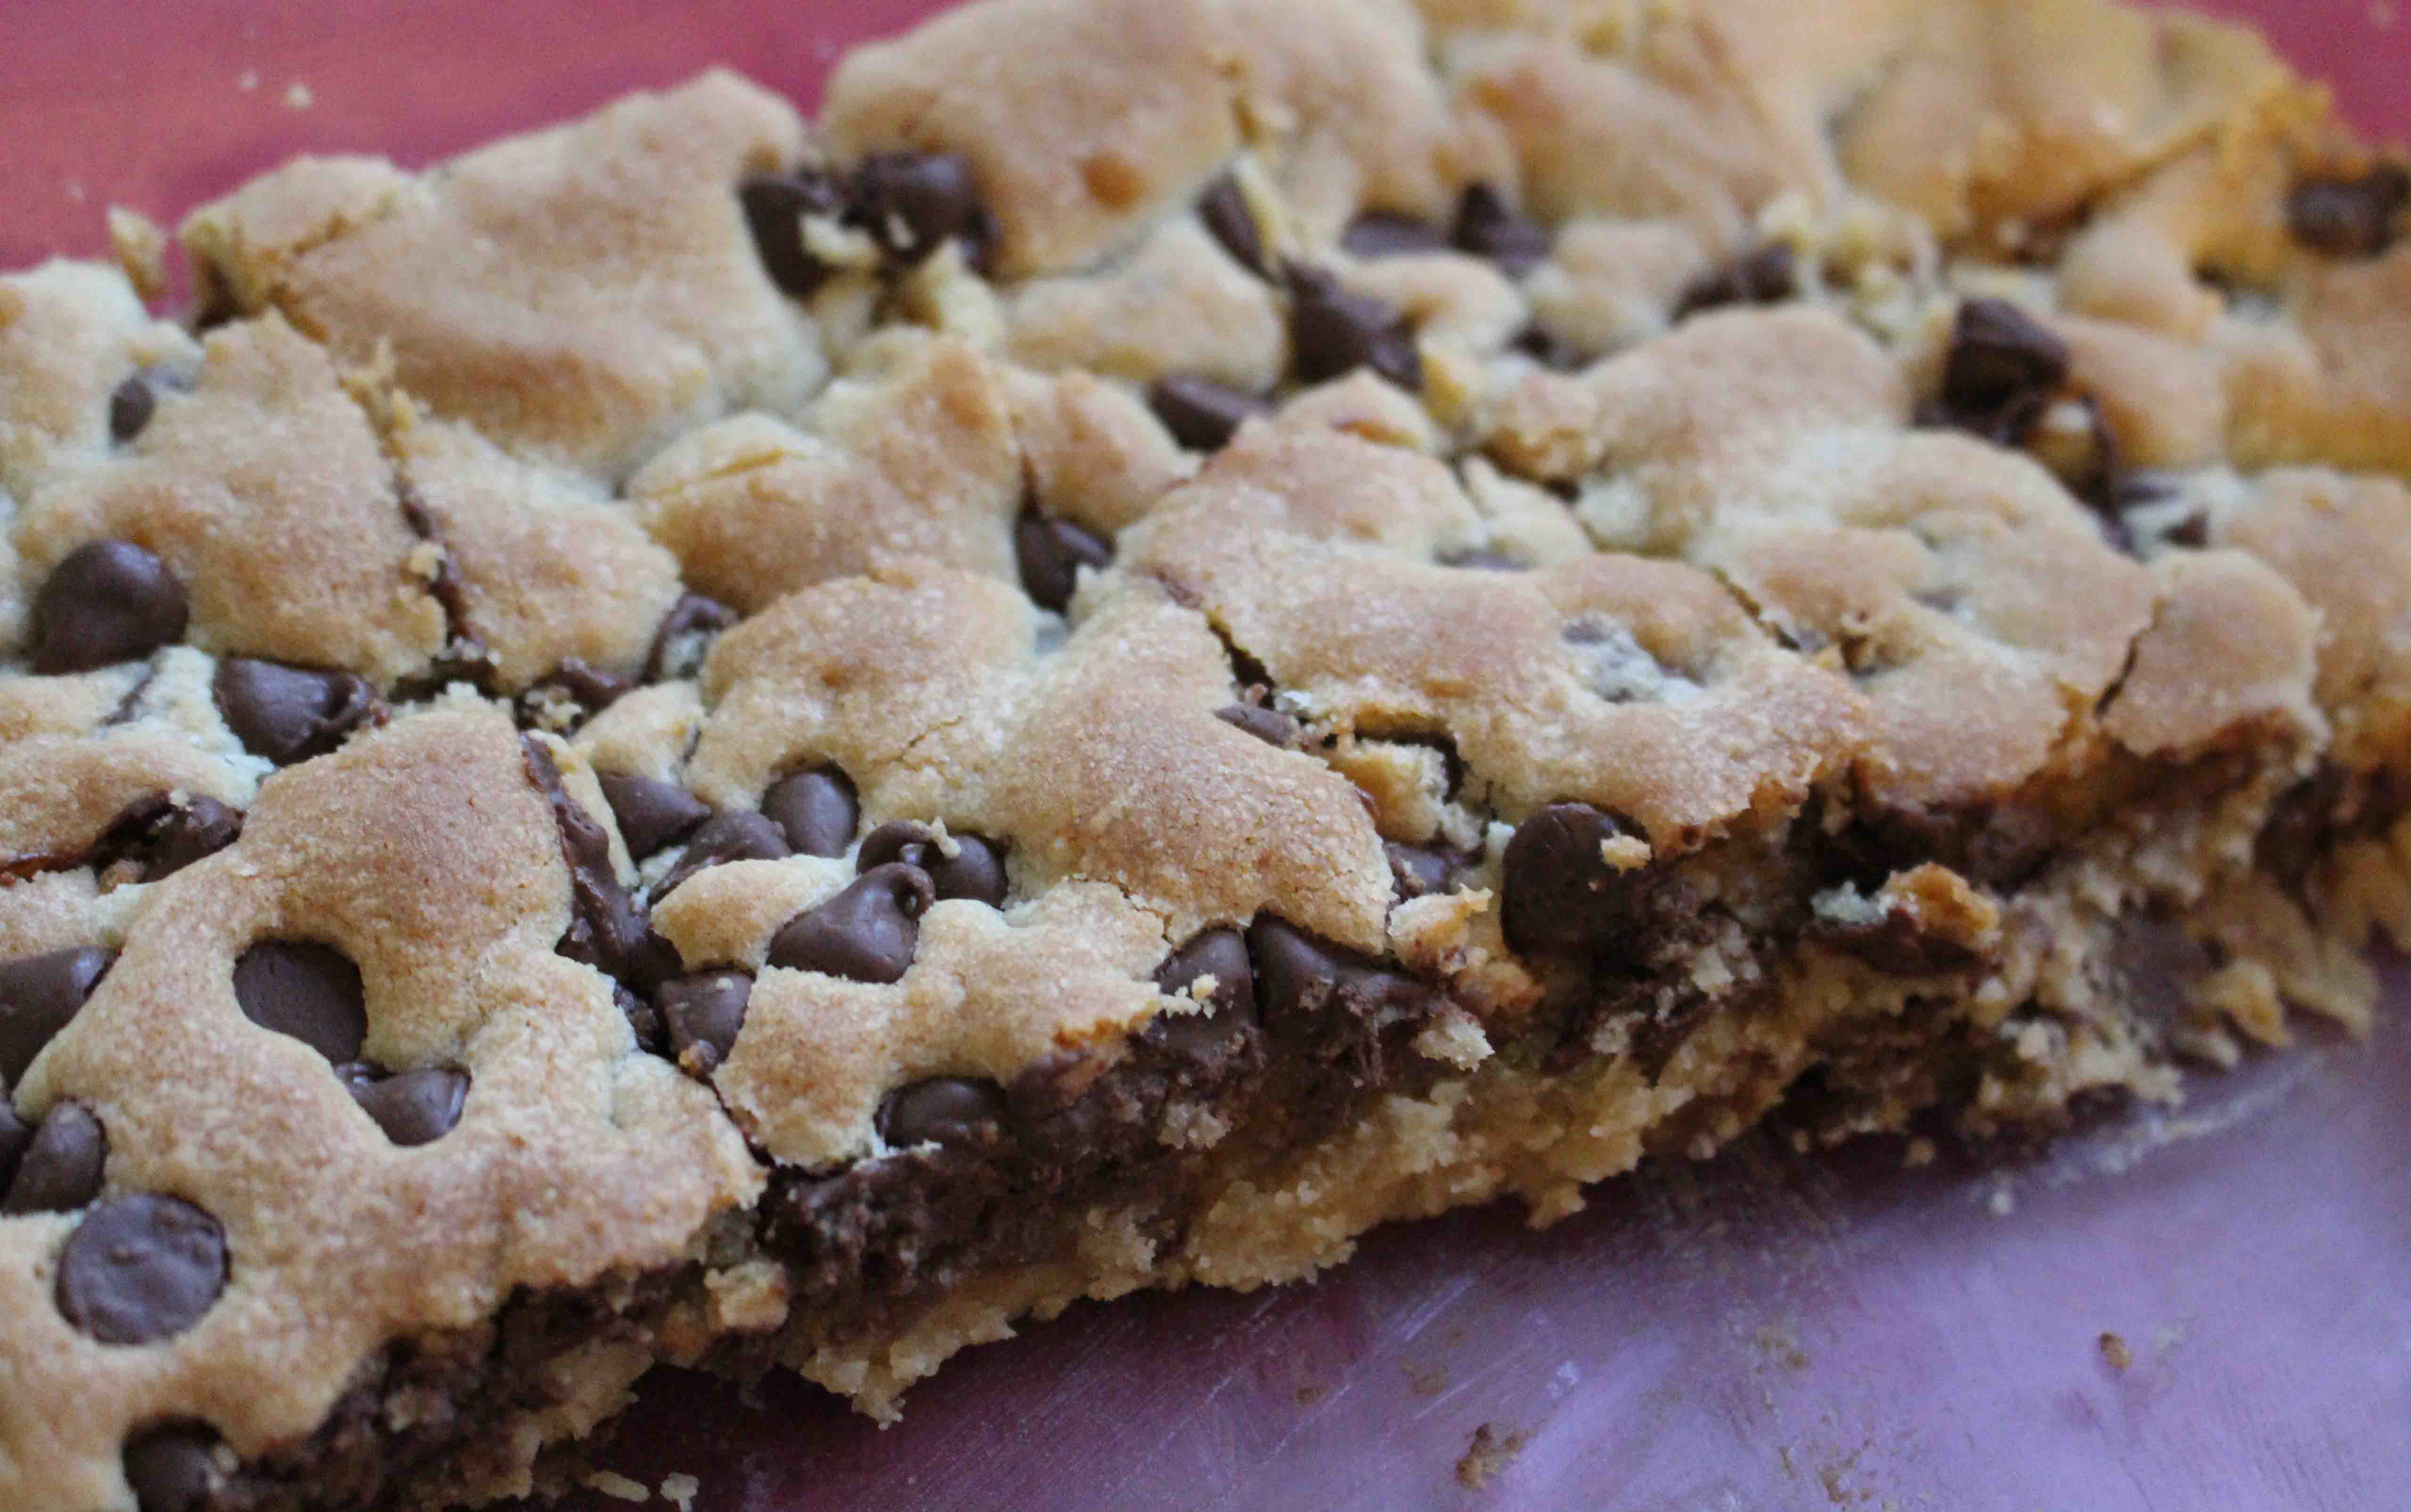 Chocolate Chip Cookie Bars have got to be the ultimate comfort food!